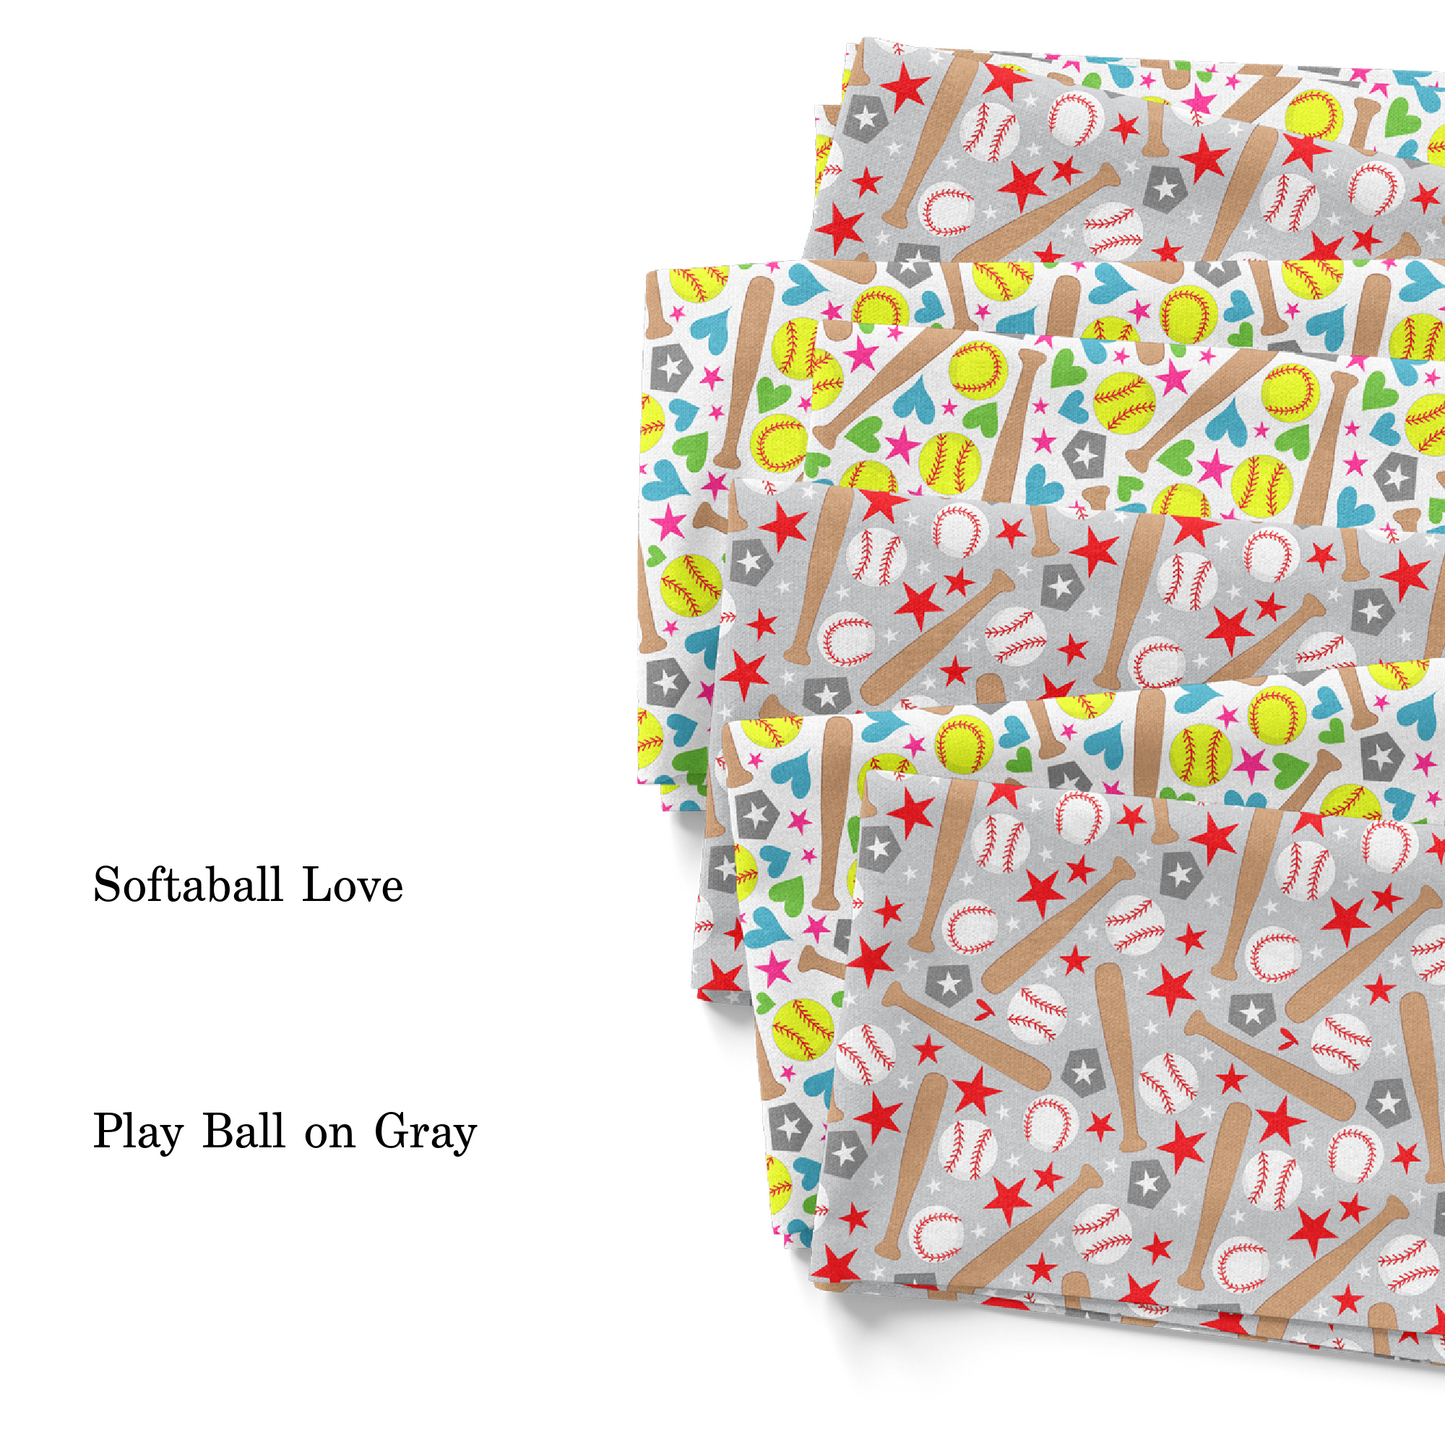 Pip Supply baseball and softball sports fabric swatch collection.